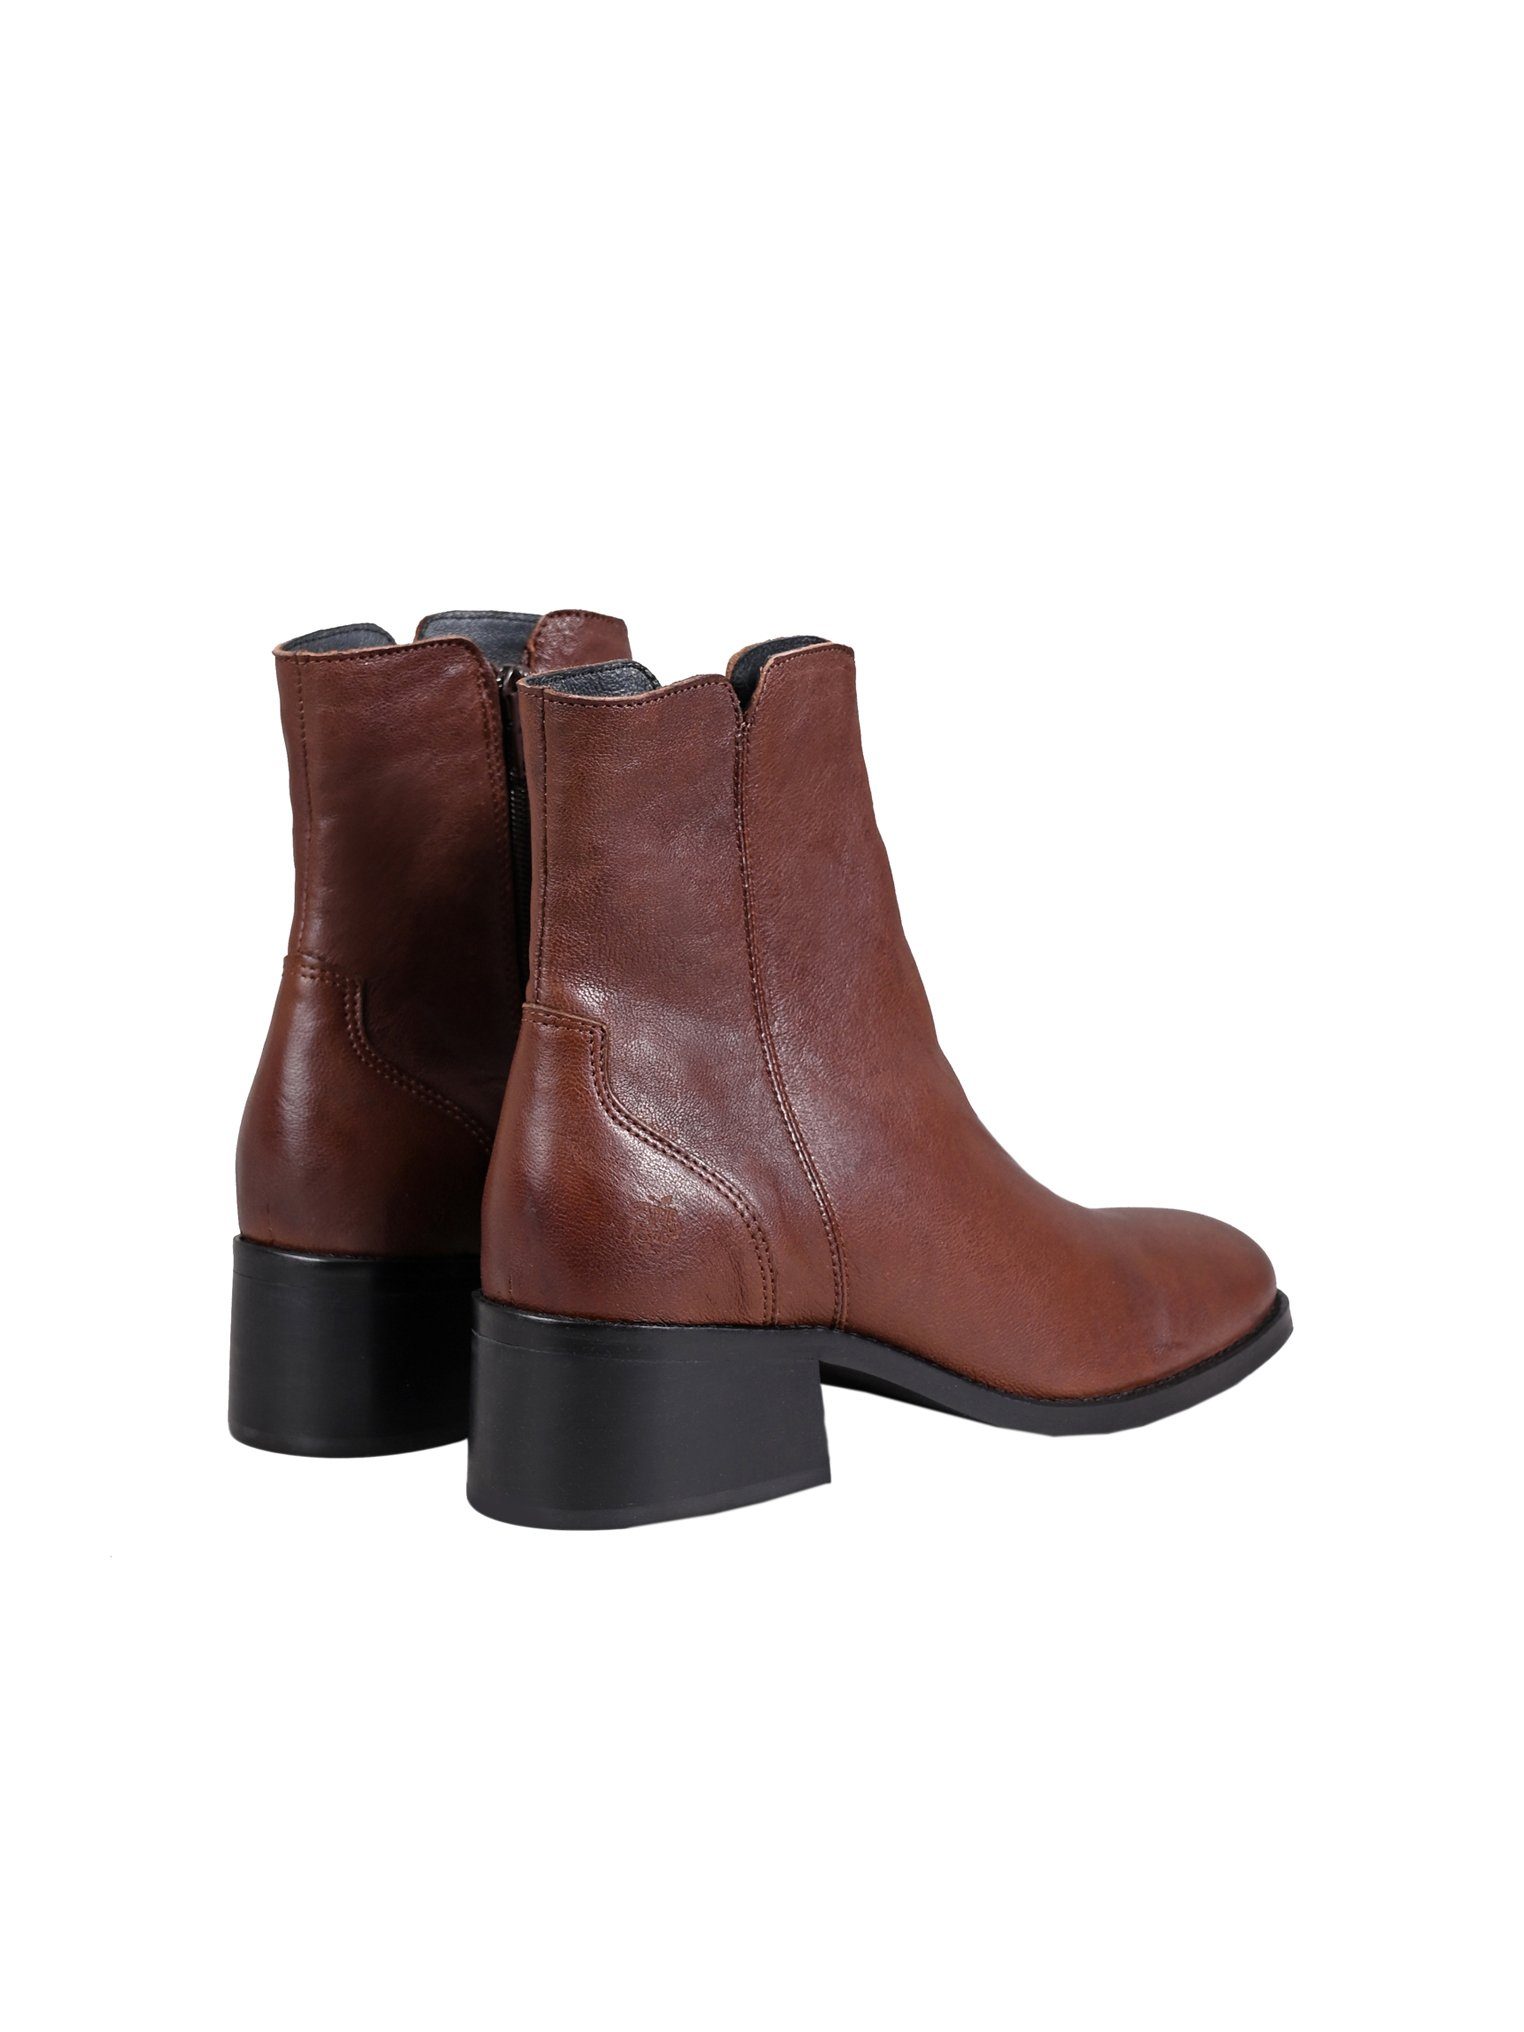 Eden Apple THEA Ankleboots of